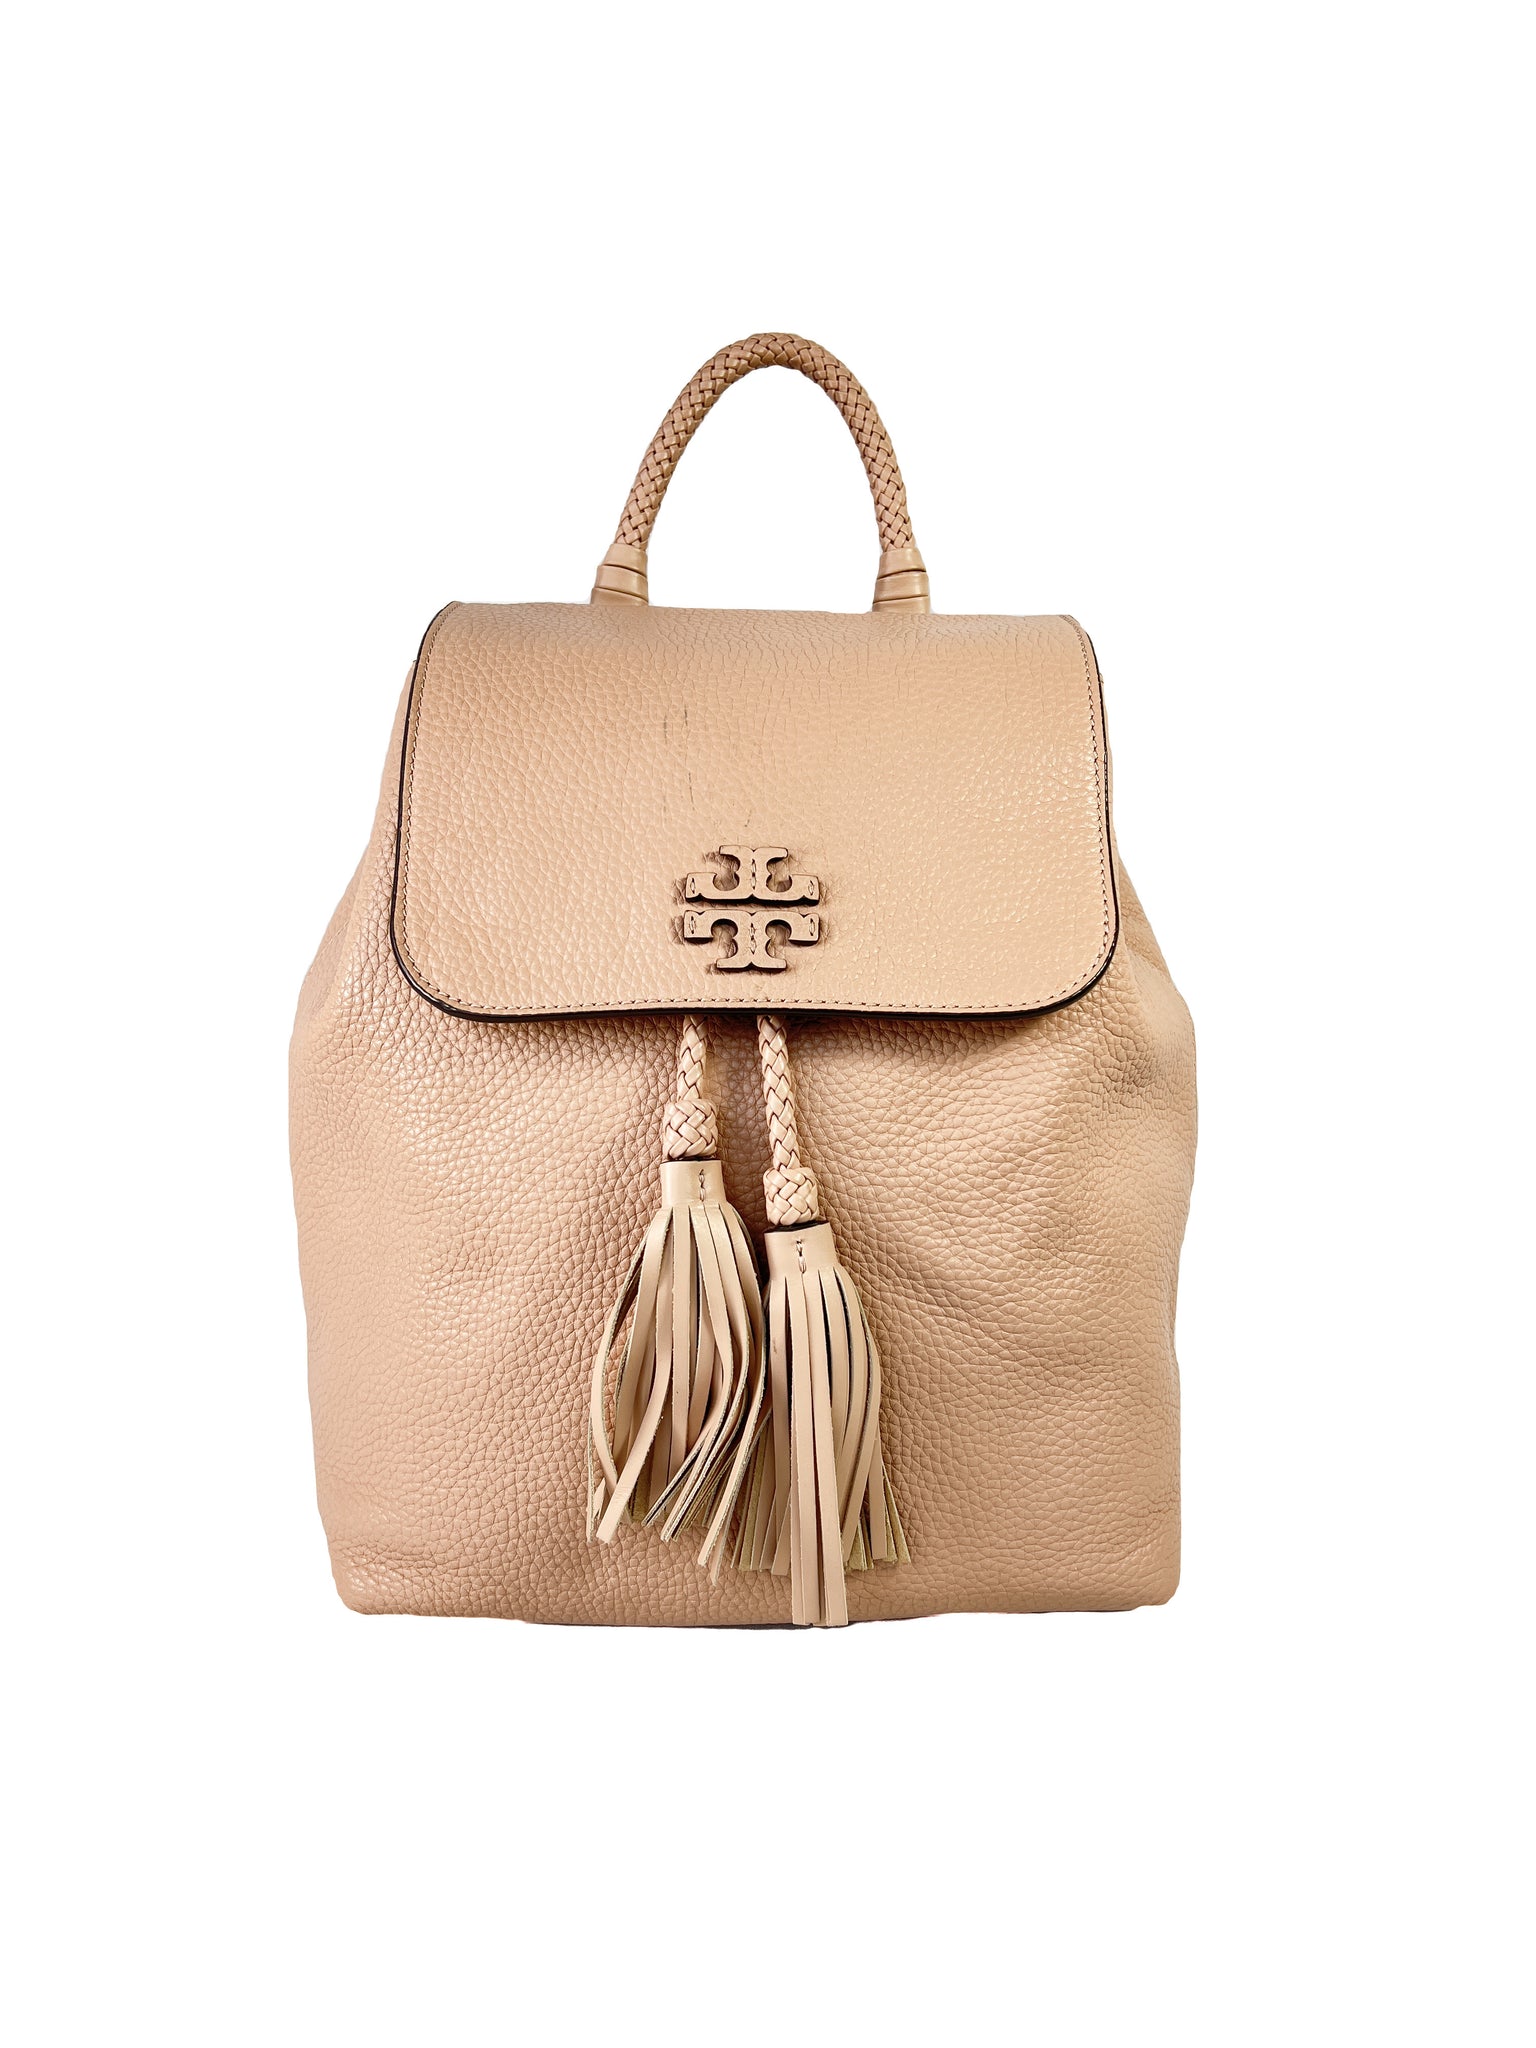 Tory Burch LEATHER BACKPACK